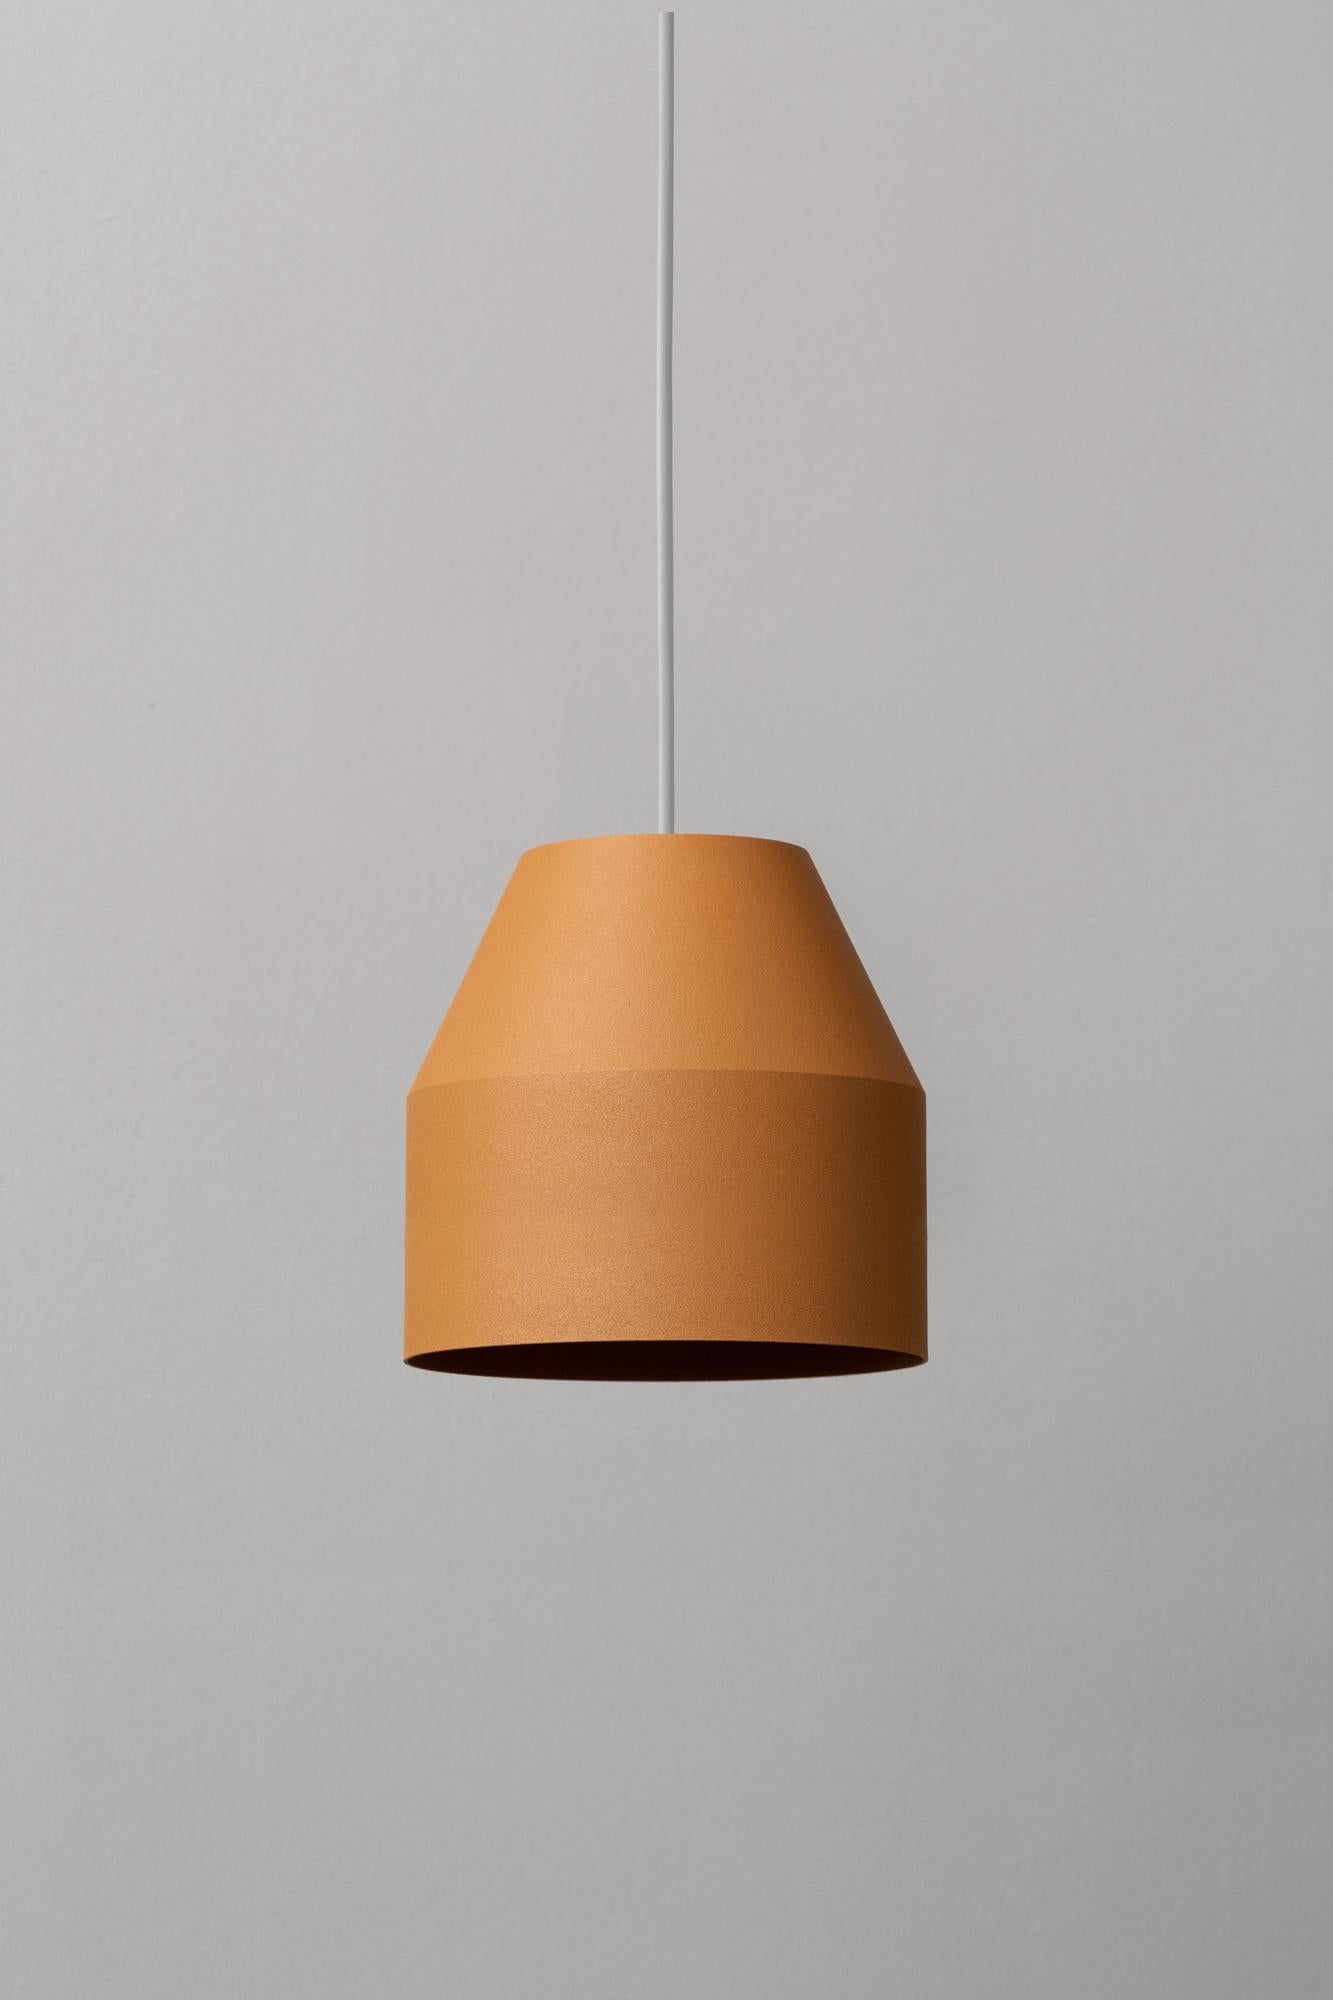 Big Almond Cap Pendant Lamp by +kouple
Dimensions: Ø 16 x H 16,5 cm. 
Materials: Powder-coated steel.

Available in different color options. Available in two different sizes. The rod length is 200 cm. Please contact us.

All our lamps can be wired